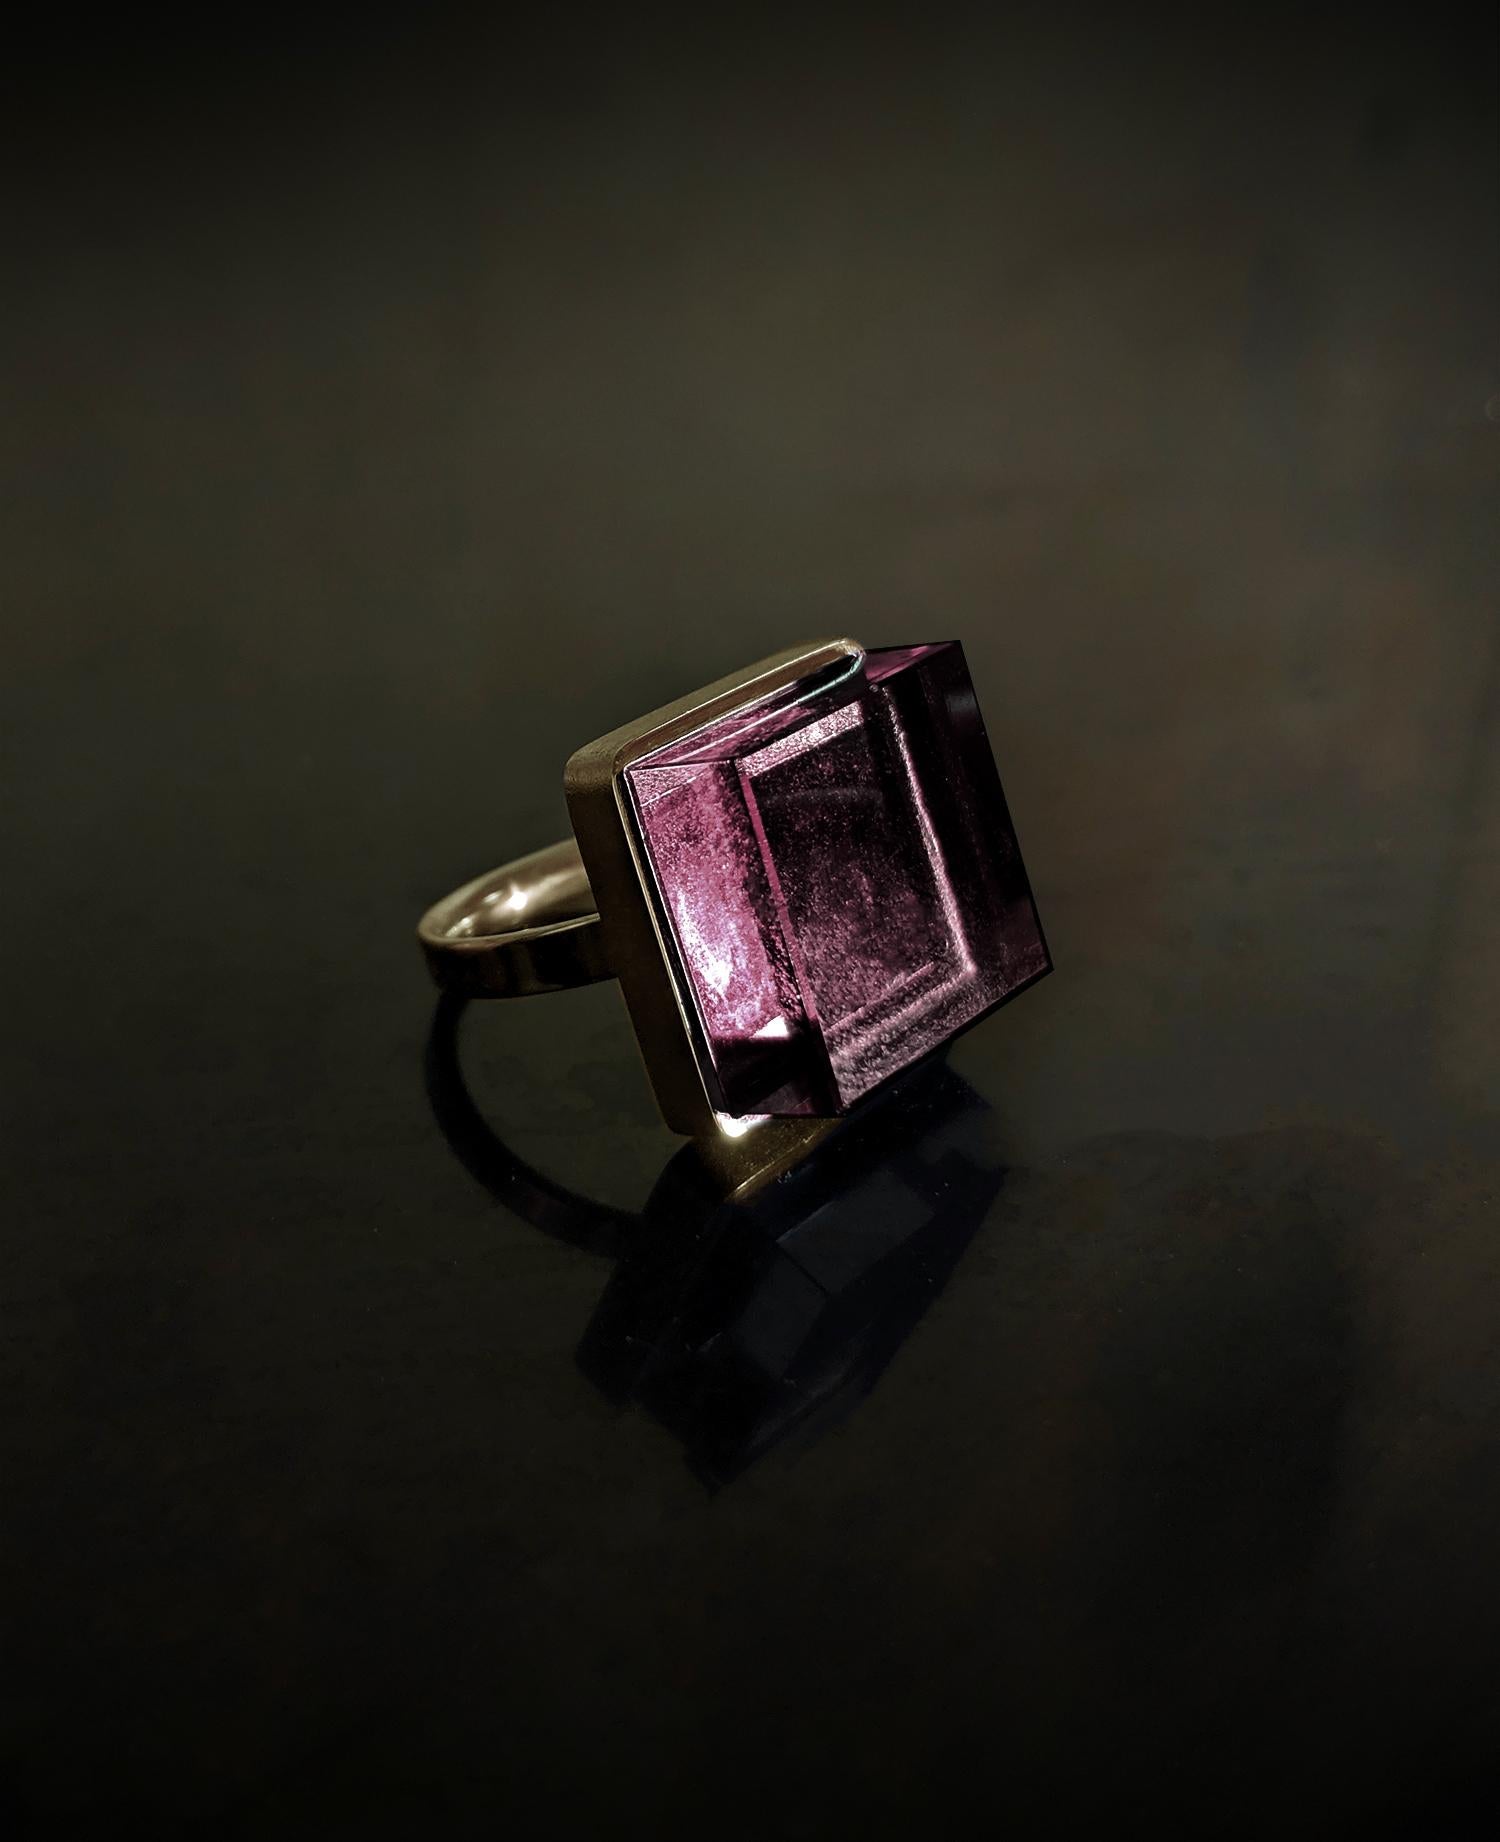 This engagement ring features a 15x15x8 mm natural pink tourmaline set in 18 karat yellow gold. A ring from this collection was previously featured in Harper's Bazaar and Vogue UA.

Inspired by the art deco era, this ring is suitable for both men